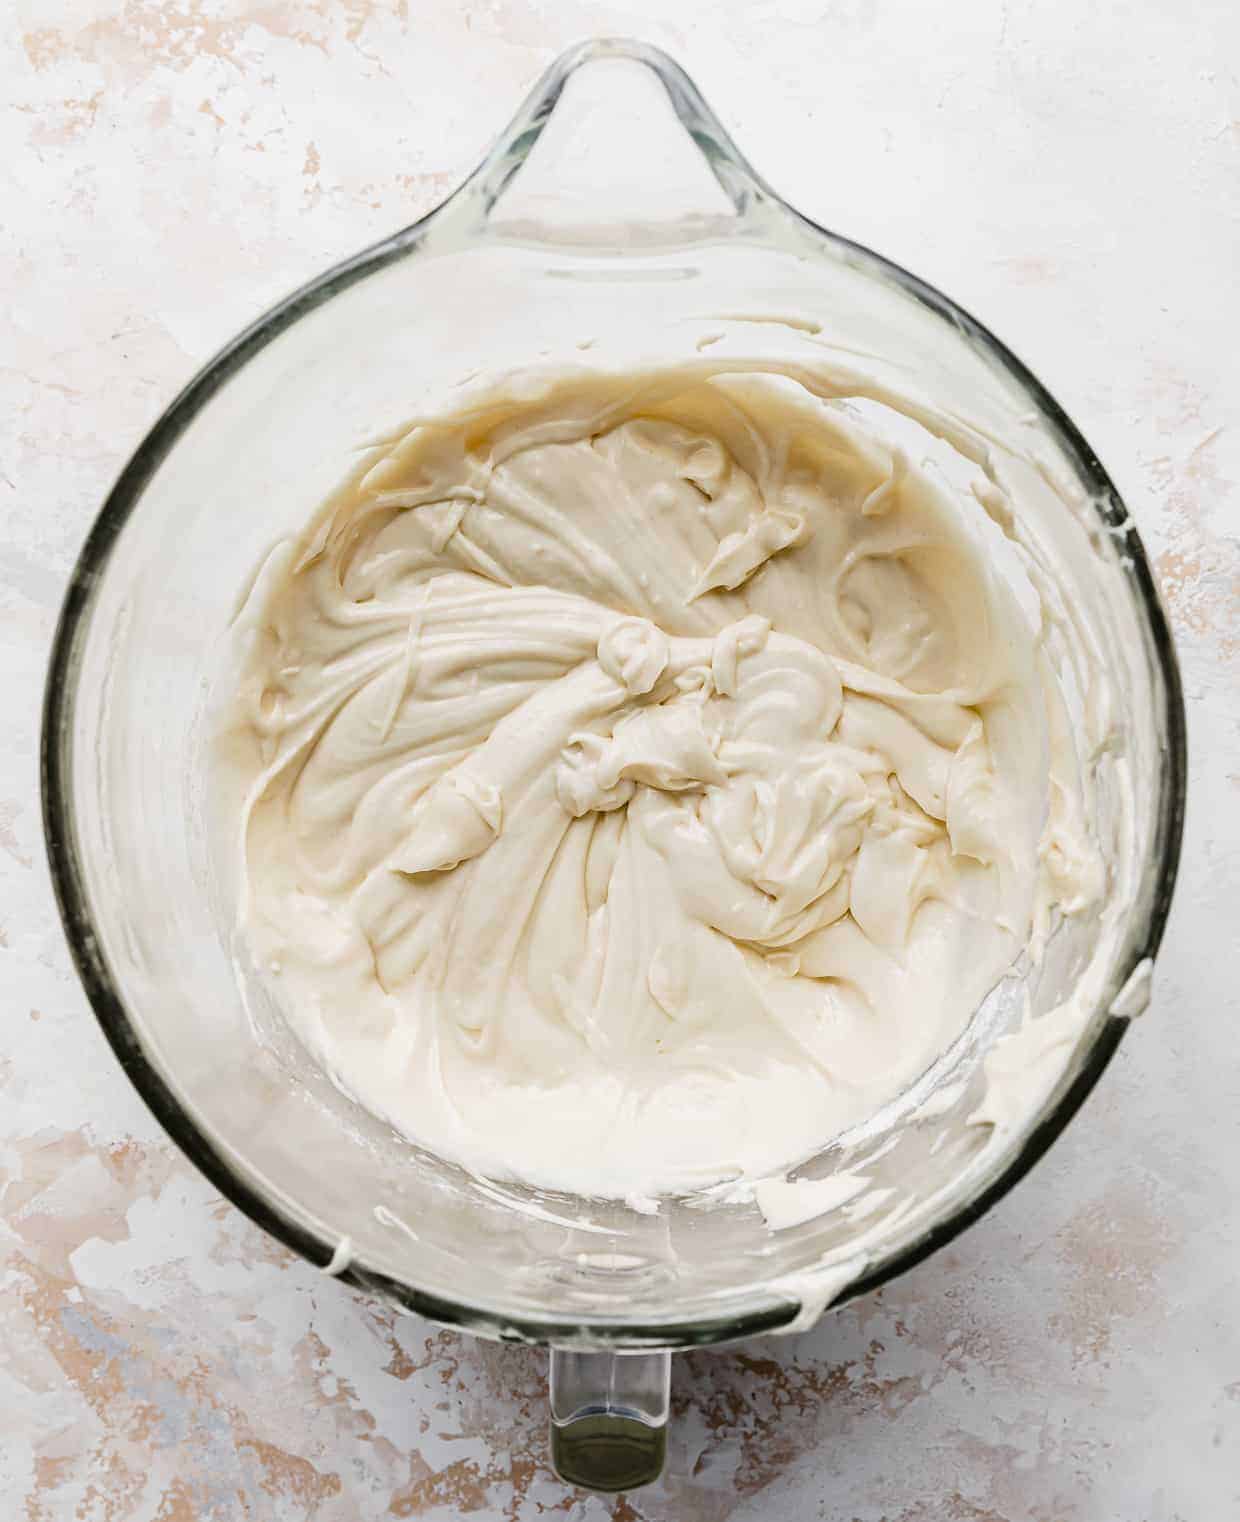 A vanilla cake batter for a smash cake recipe in a stand mixer bowl.